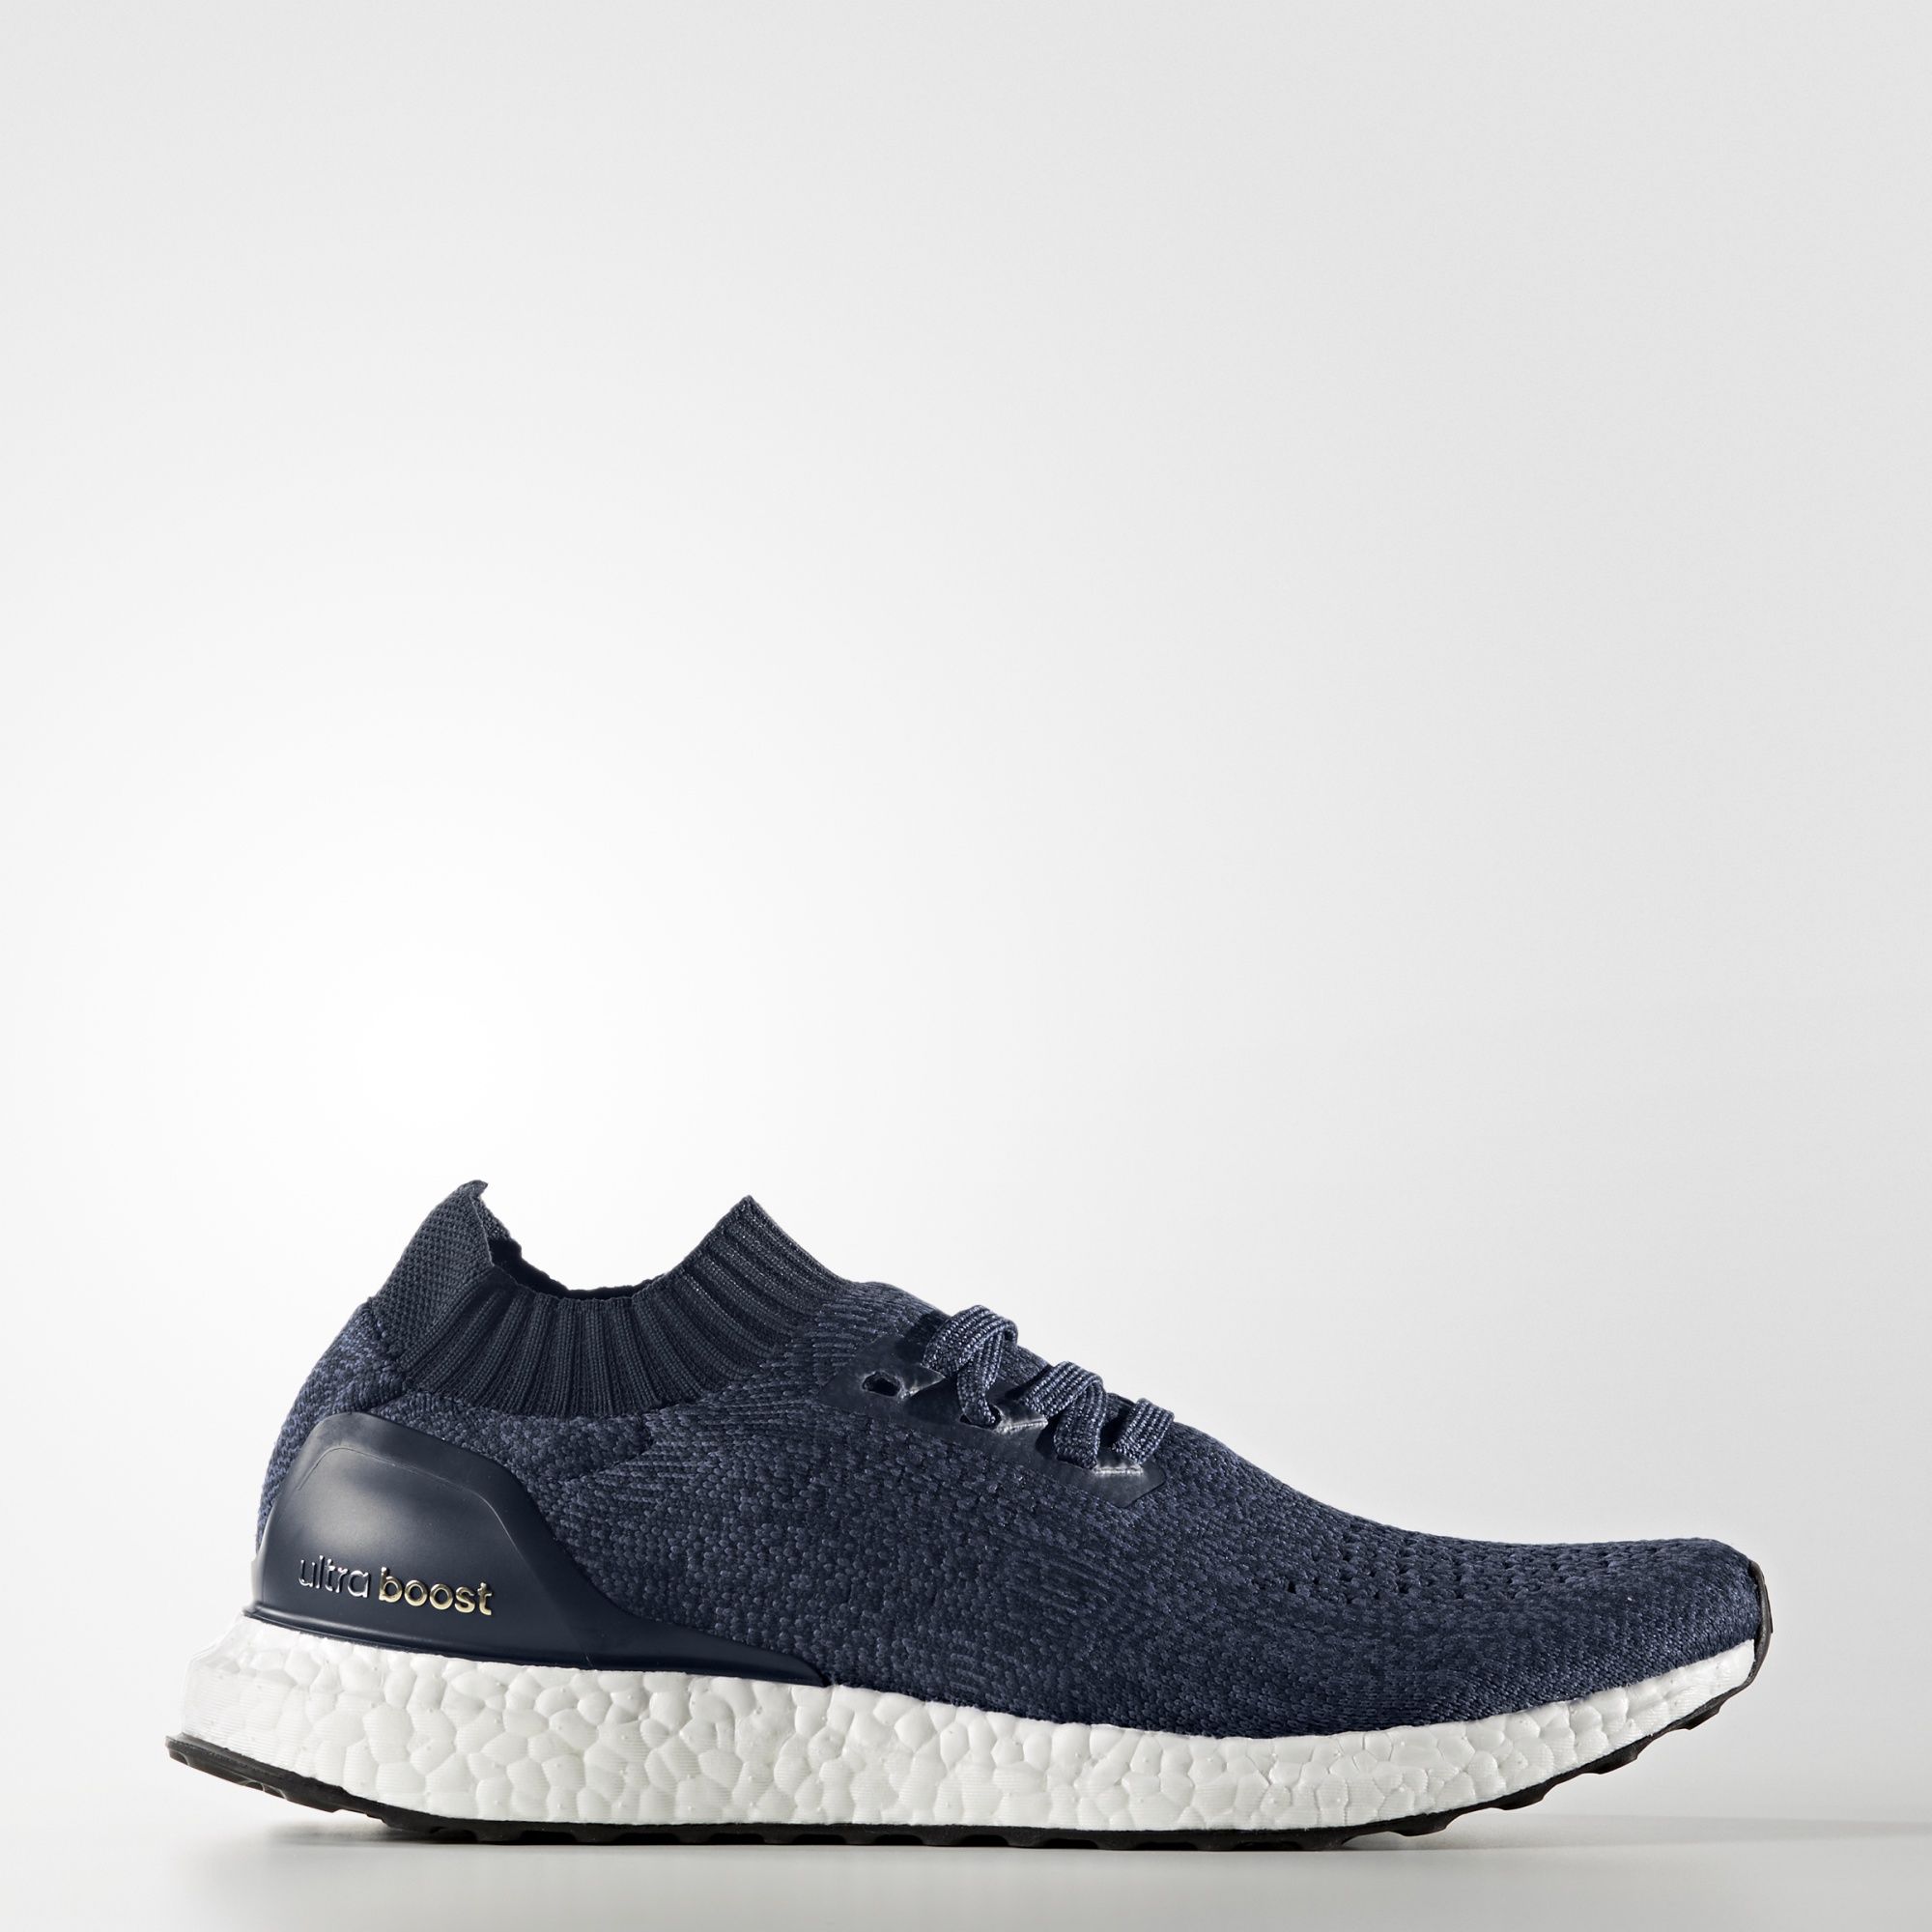 Adidas UltraBoost Uncaged 
Navy / White 